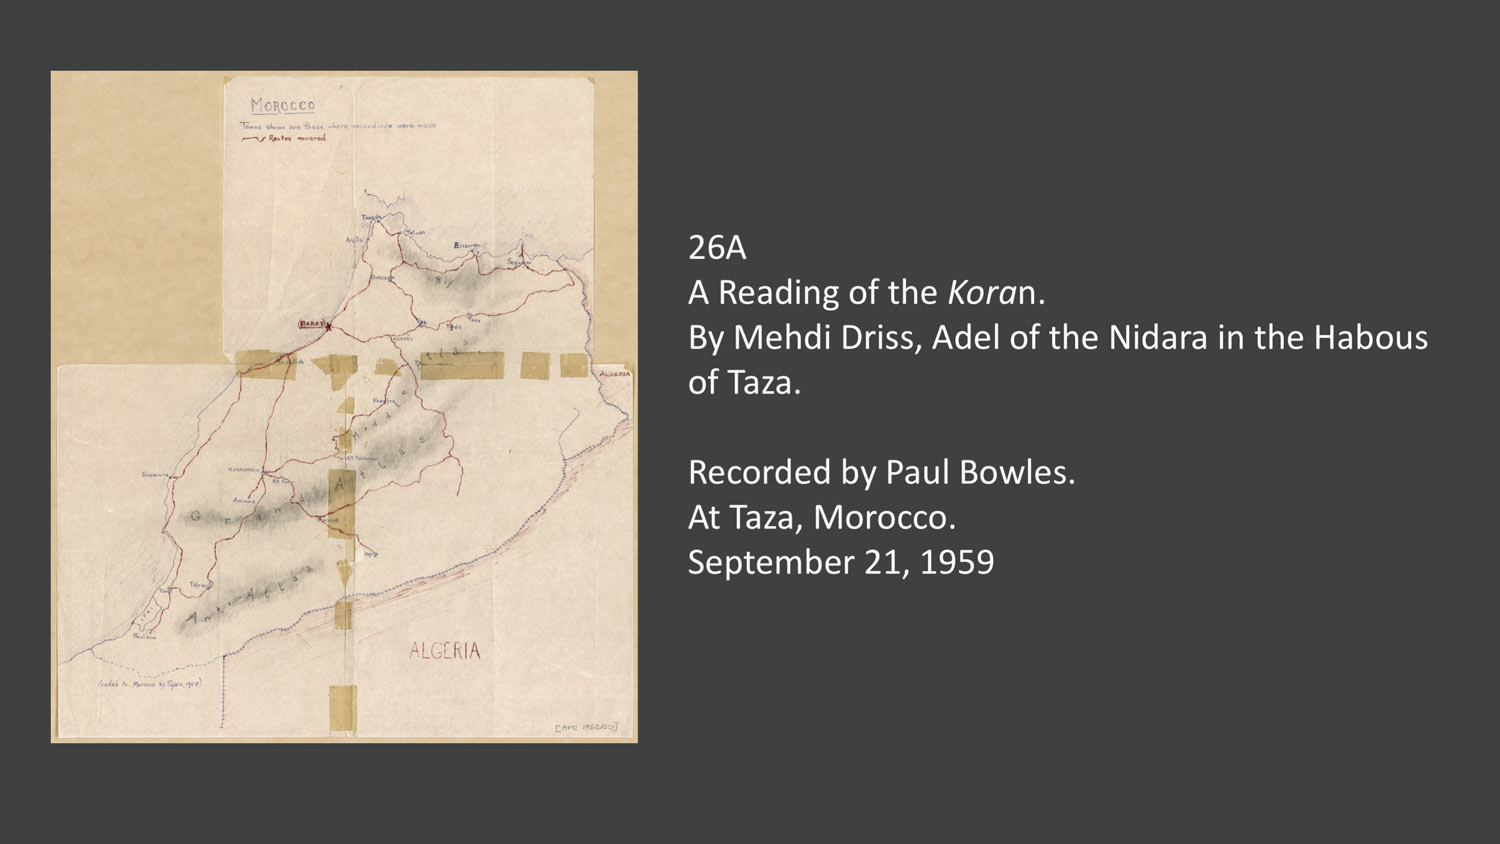 26A A Reading of the Koran
By Mehdi Driss, Adel of the Nidara in the Habous of Taza